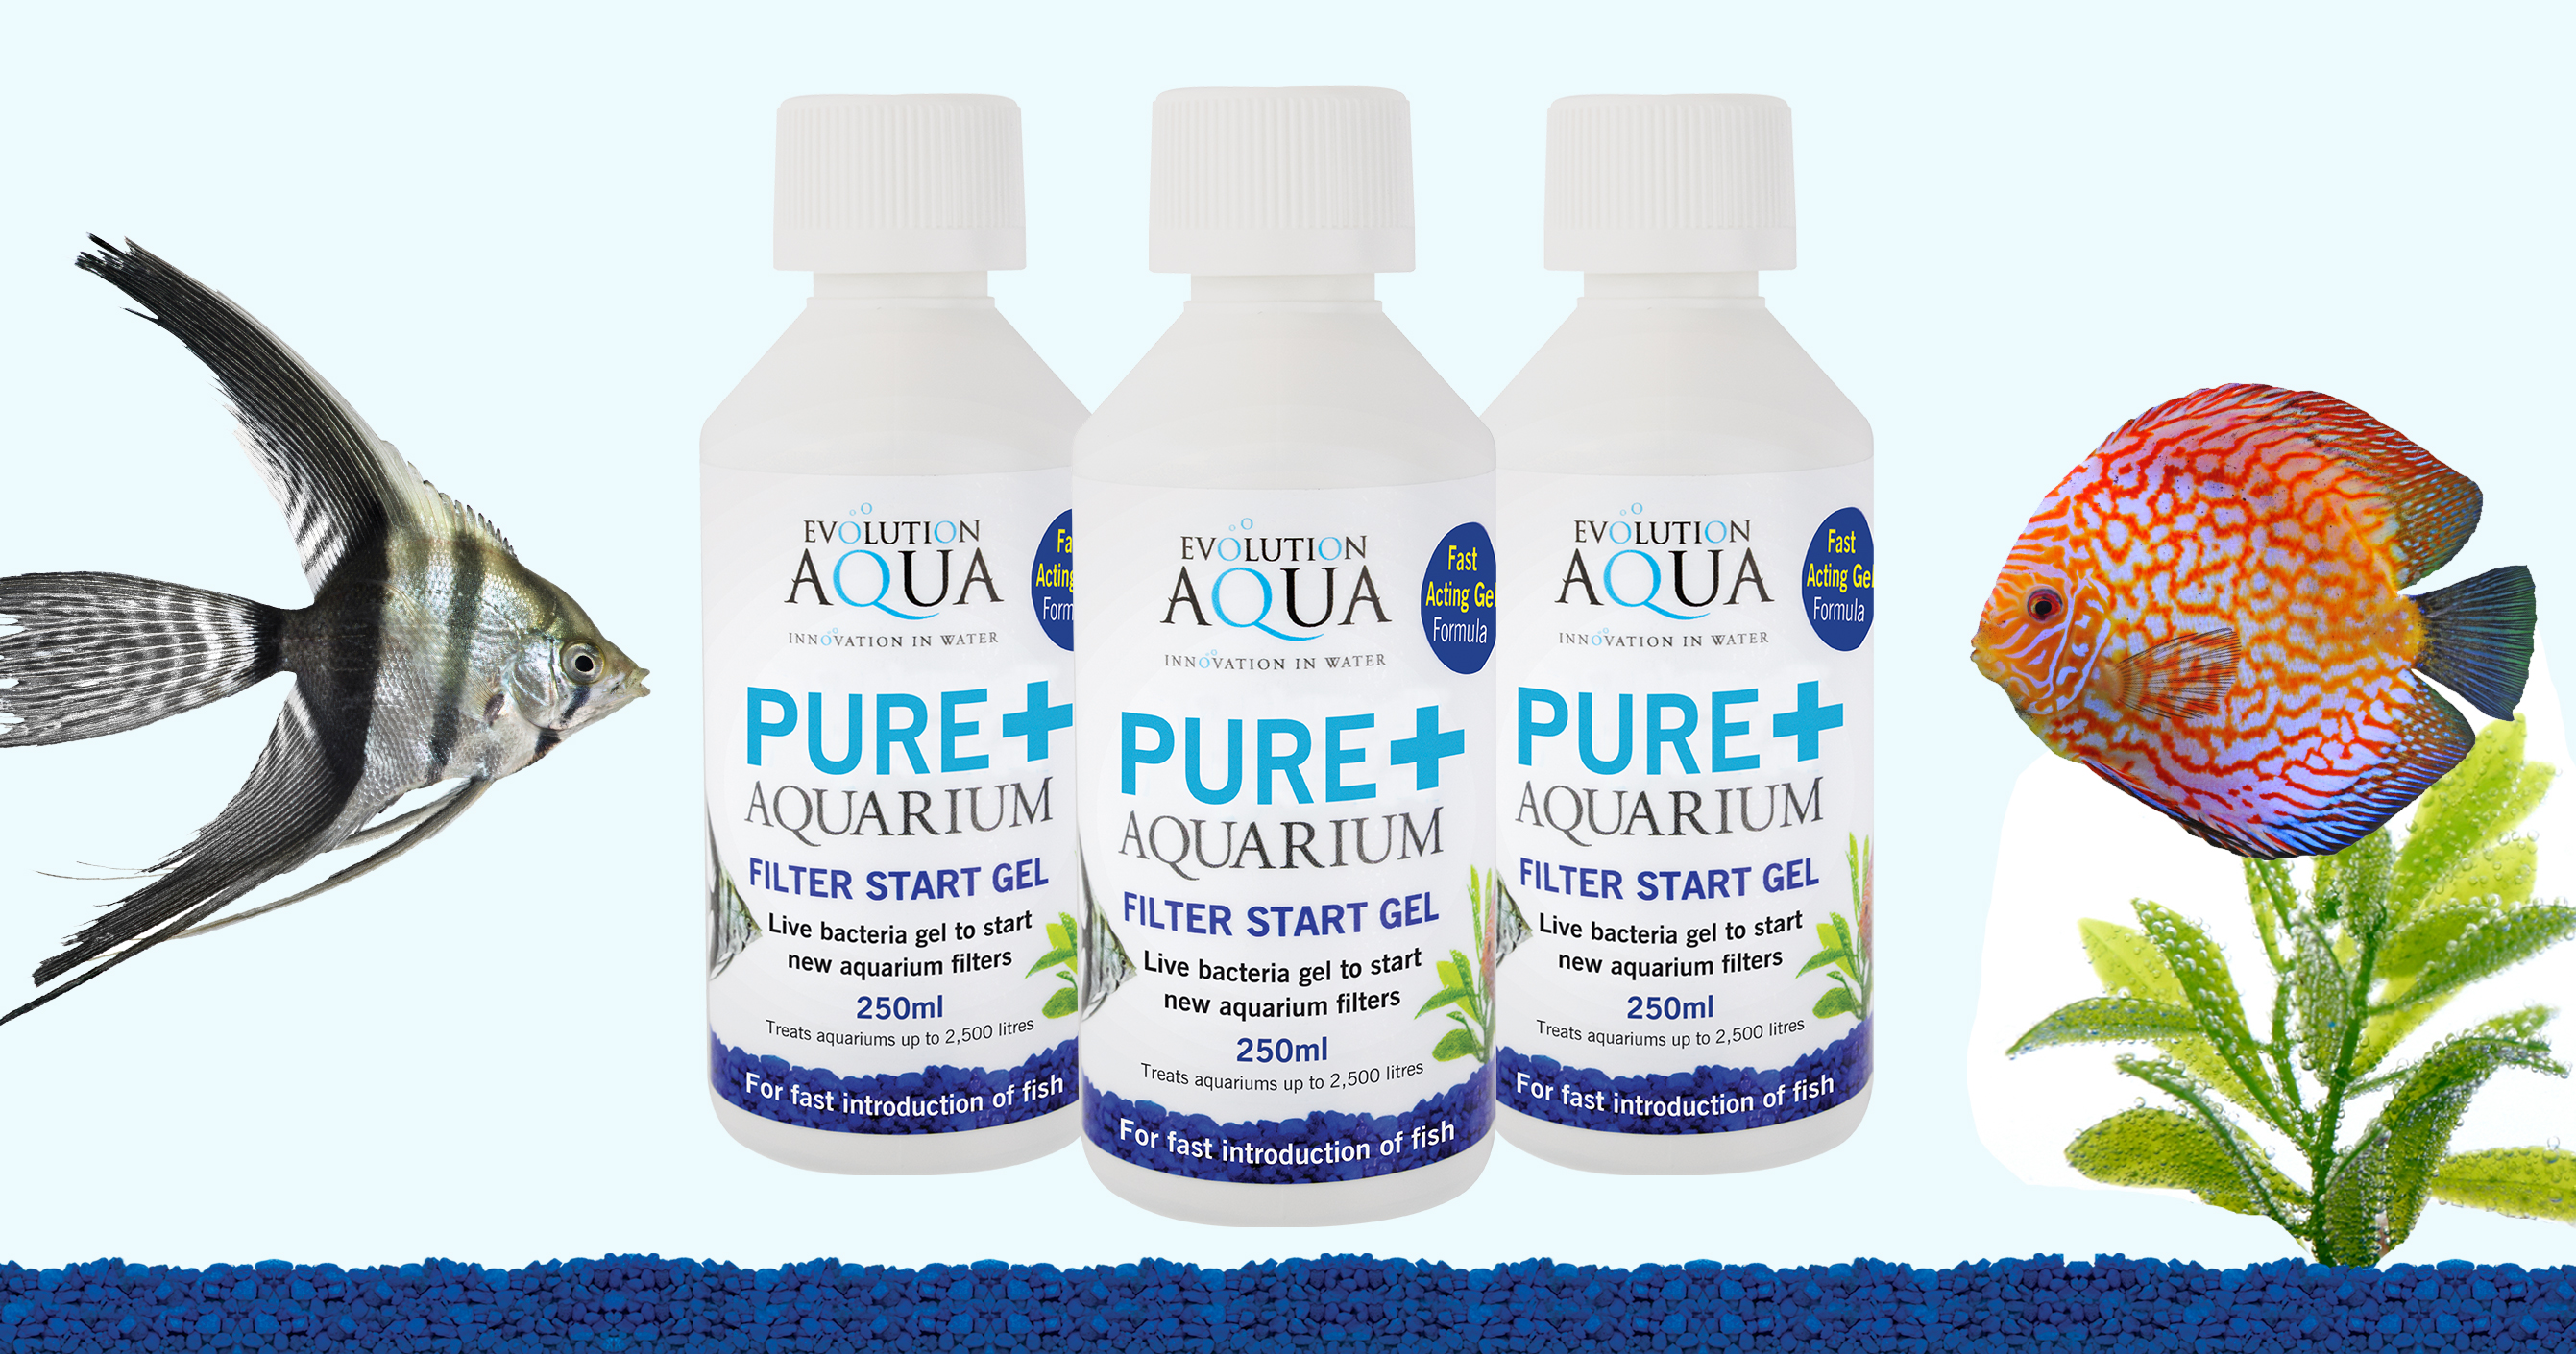 Evolution Aqua Extends Its Range of Award-Winning PURE Bacterial Products